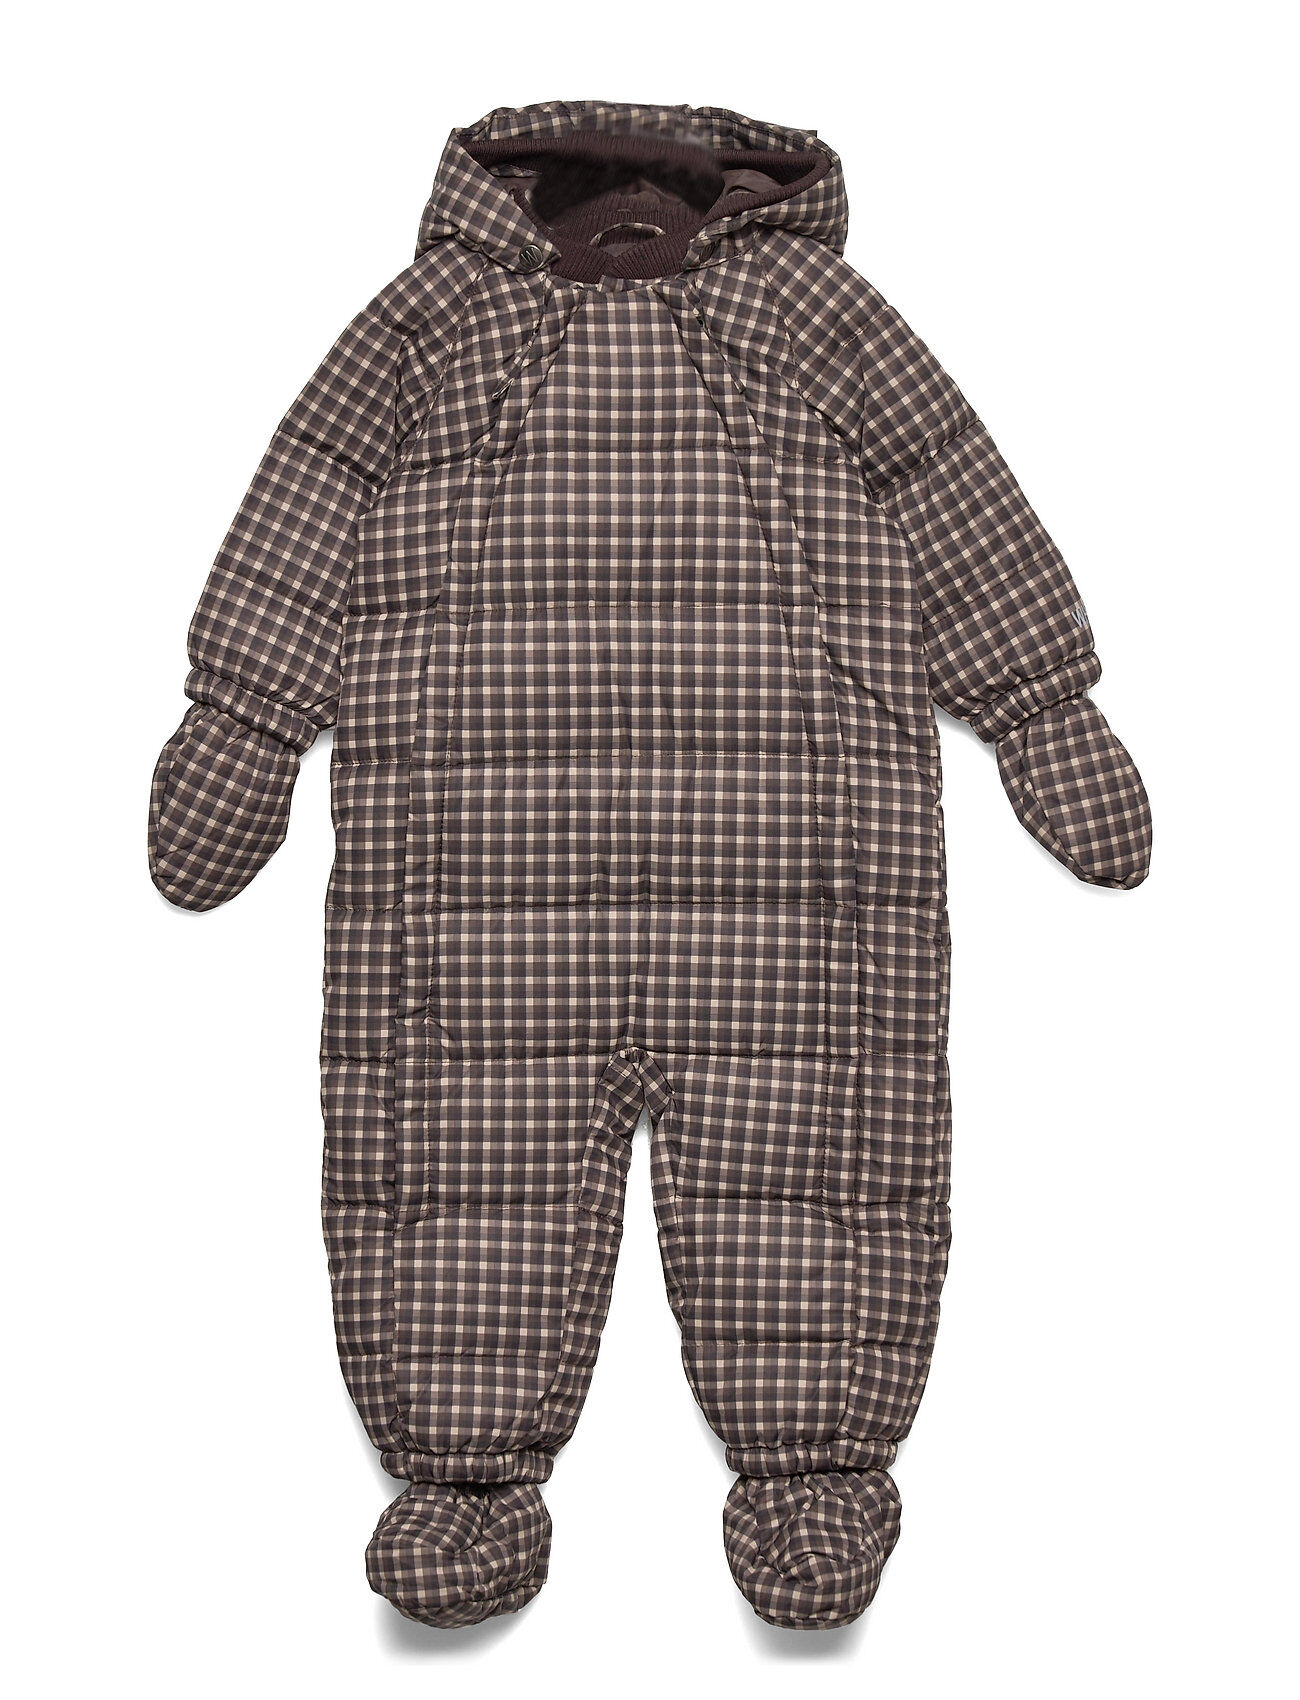 Wheat Puffer Baby Suit Outerwear Coveralls Snow/ski Coveralls & Sets Brun Wheat